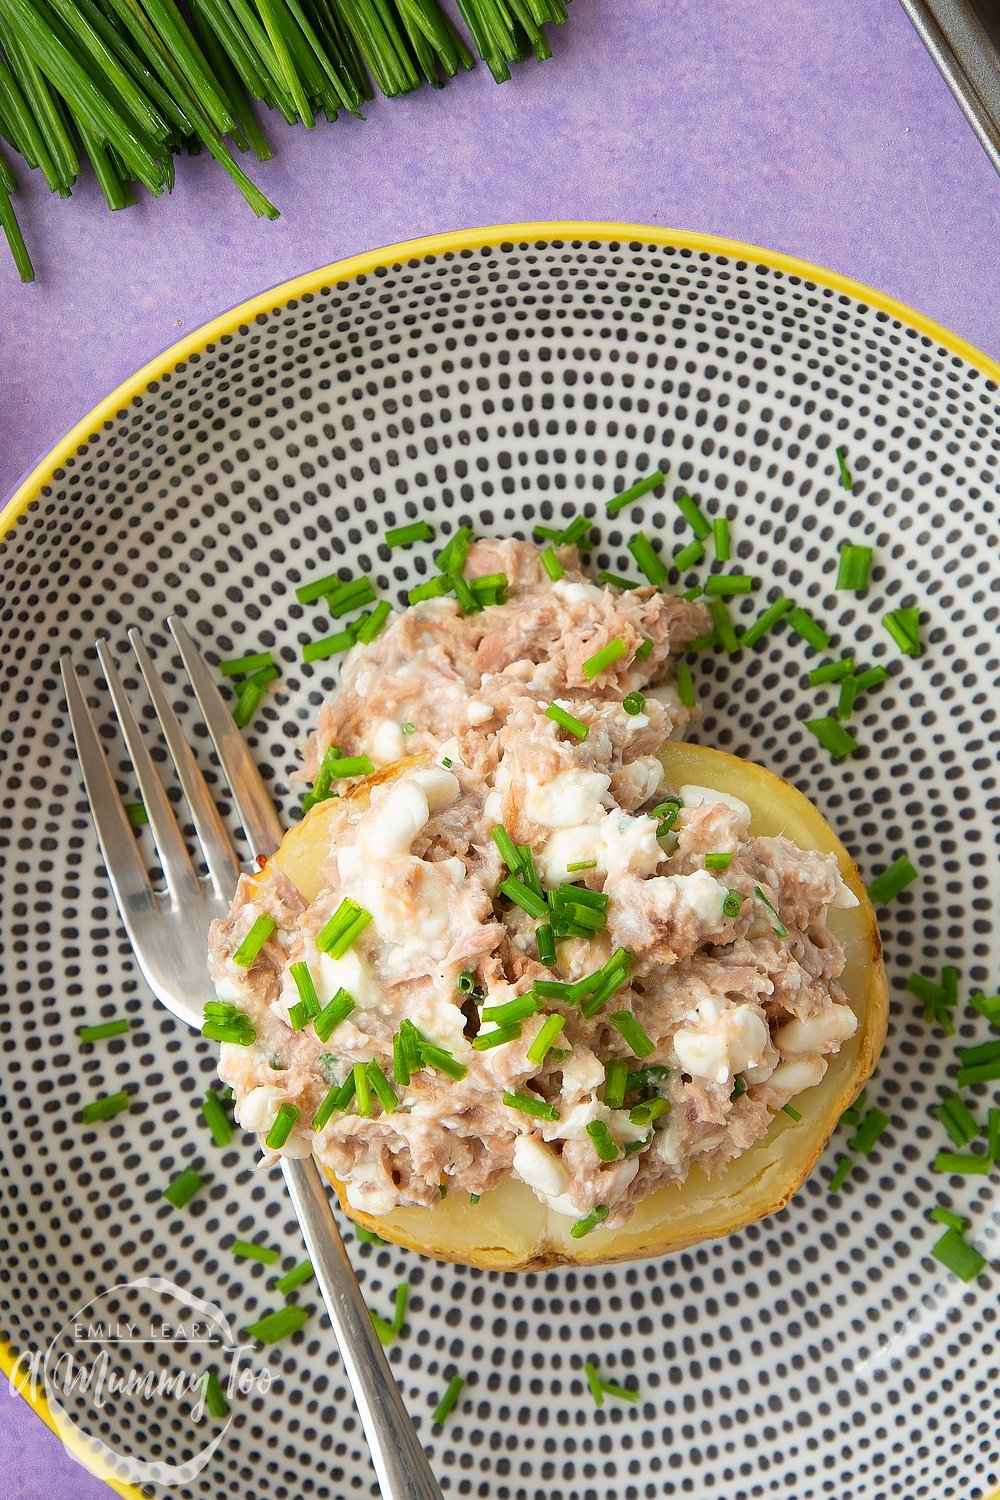 A finished serving of low-fat tuna cheese jacket potato 